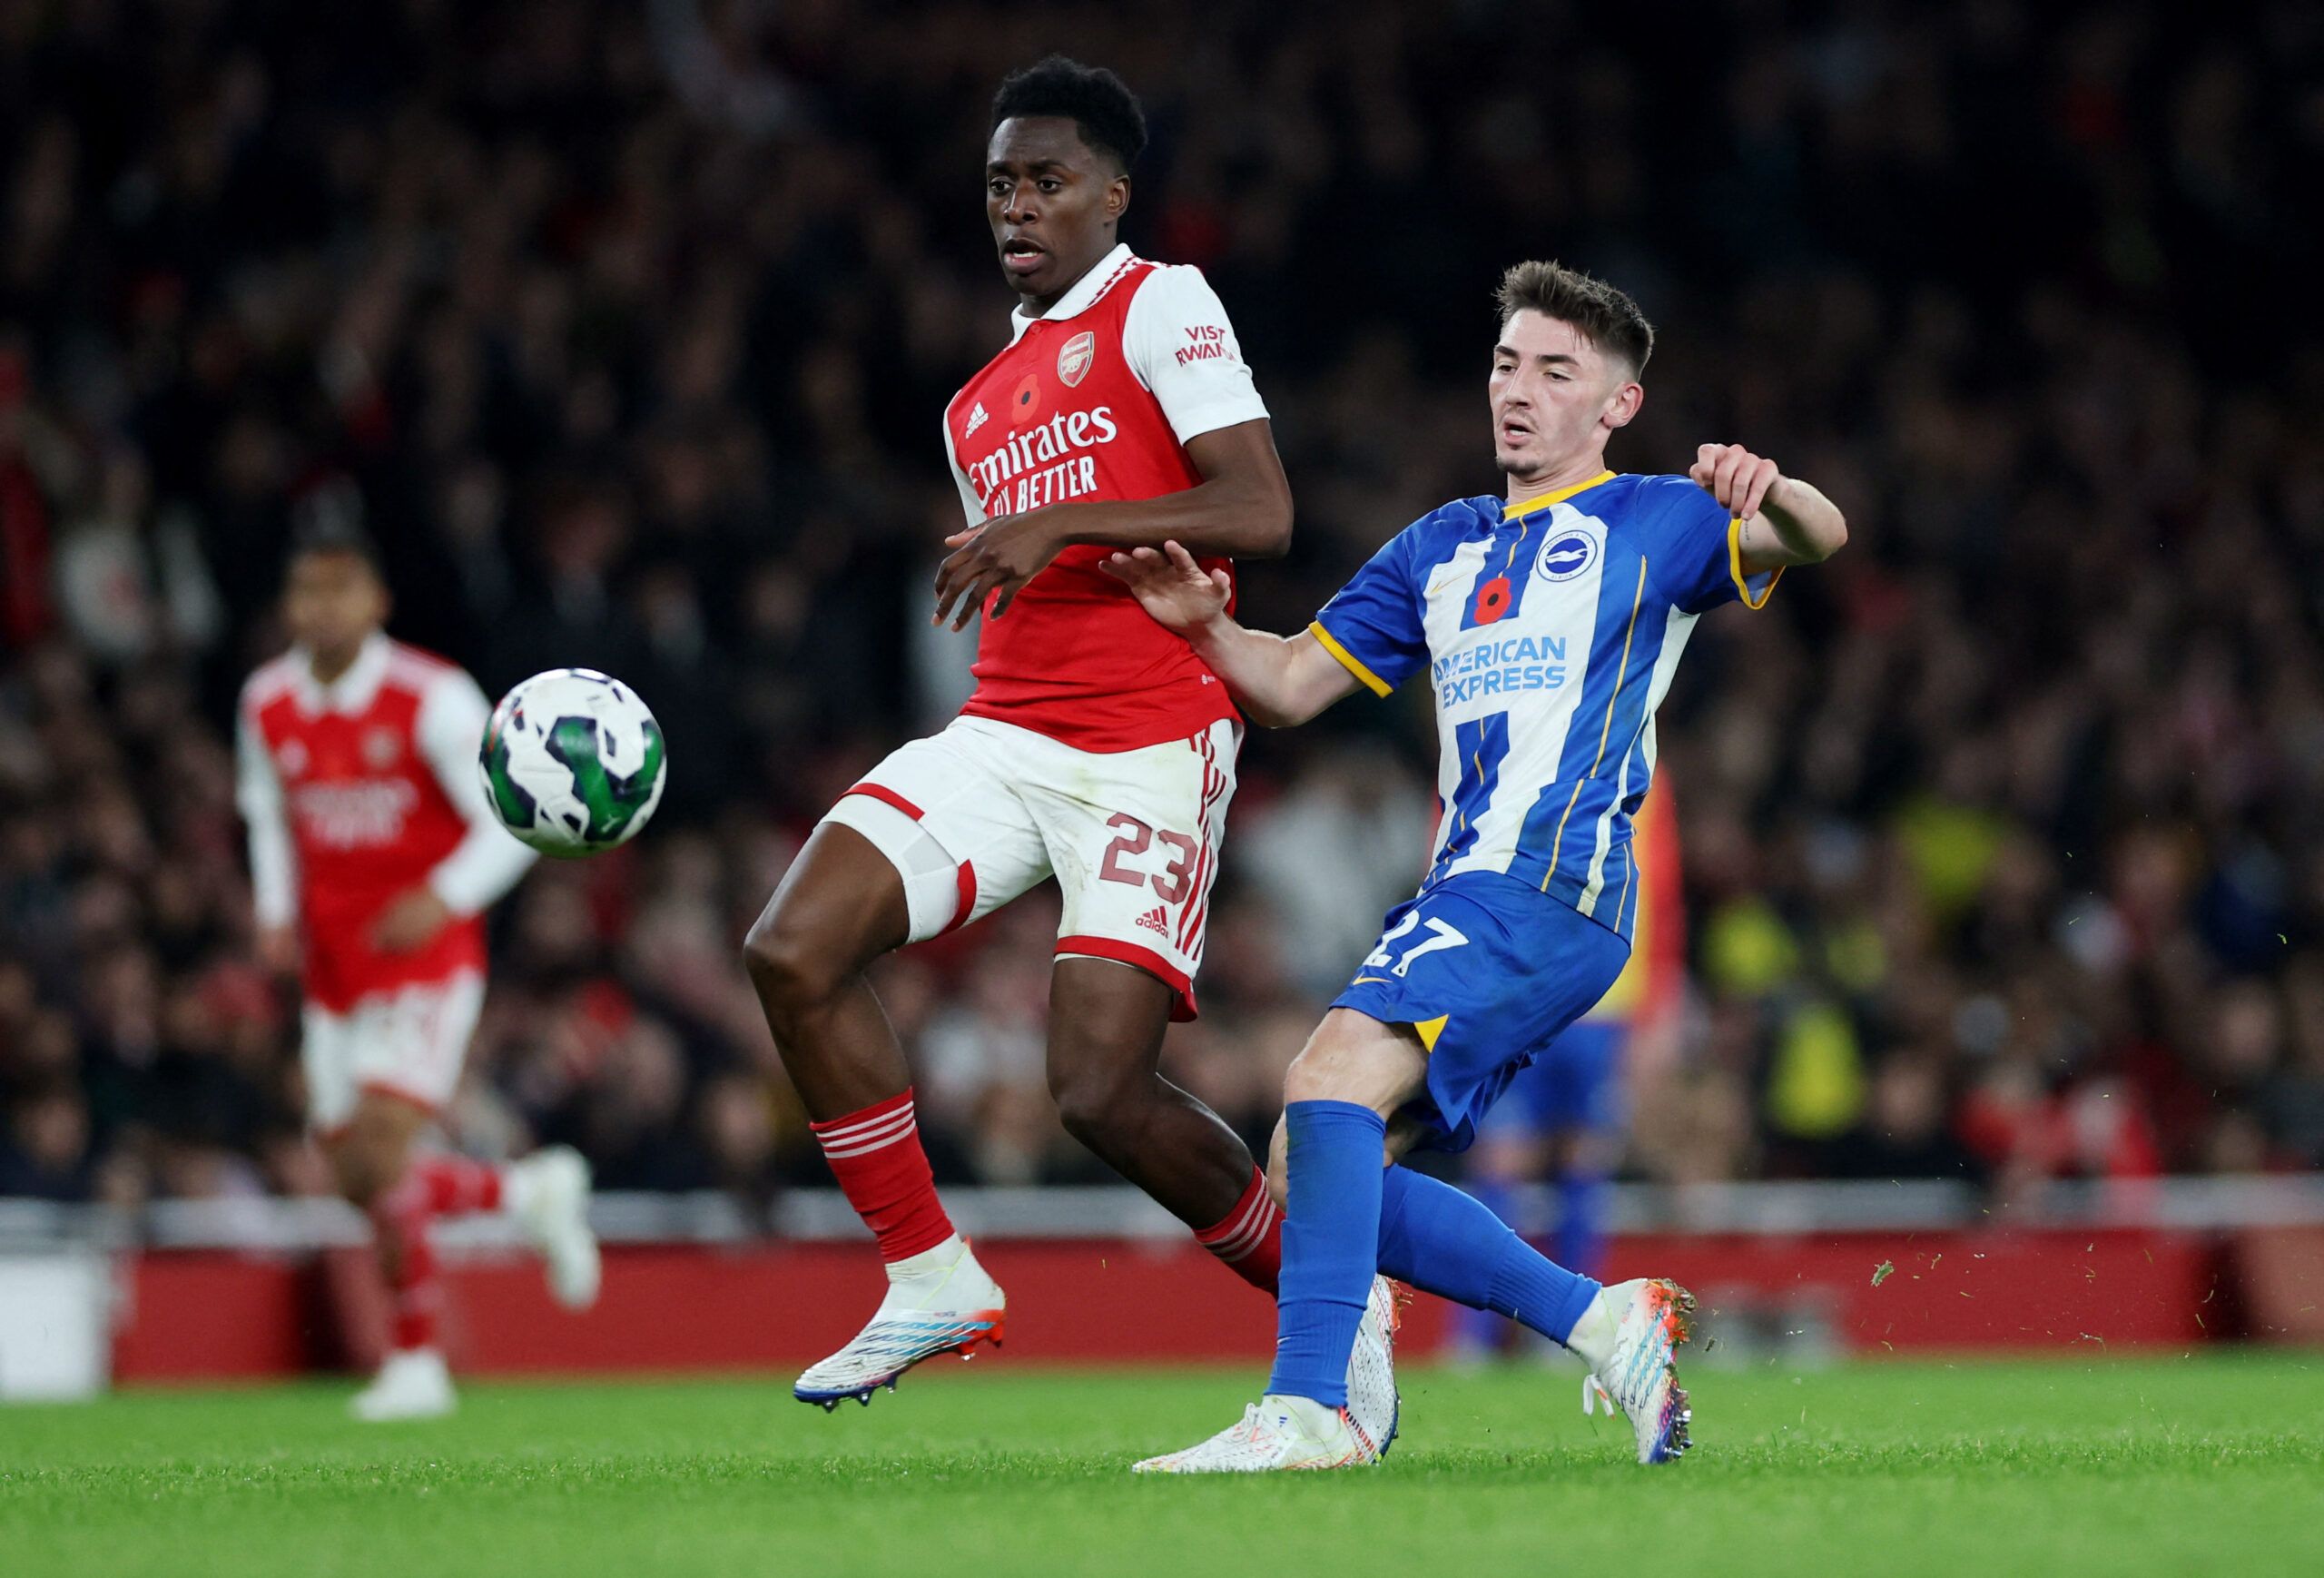 Soccer Football - Carabao Cup Third Round - Arsenal v Brighton &amp; Hove Albion - Emirates Stadium, London, Britain - November 9, 2022 Arsenal's Albert Sambi Lokonga in action with Brighton &amp; Hove Albion's Billy Gilmour Action Images via Reuters/Matthew Childs EDITORIAL USE ONLY. No use with unauthorized audio, video, data, fixture lists, club/league logos or 'live' services. Online in-match use limited to 75 images, no video emulation. No use in betting, games or single club /league/player